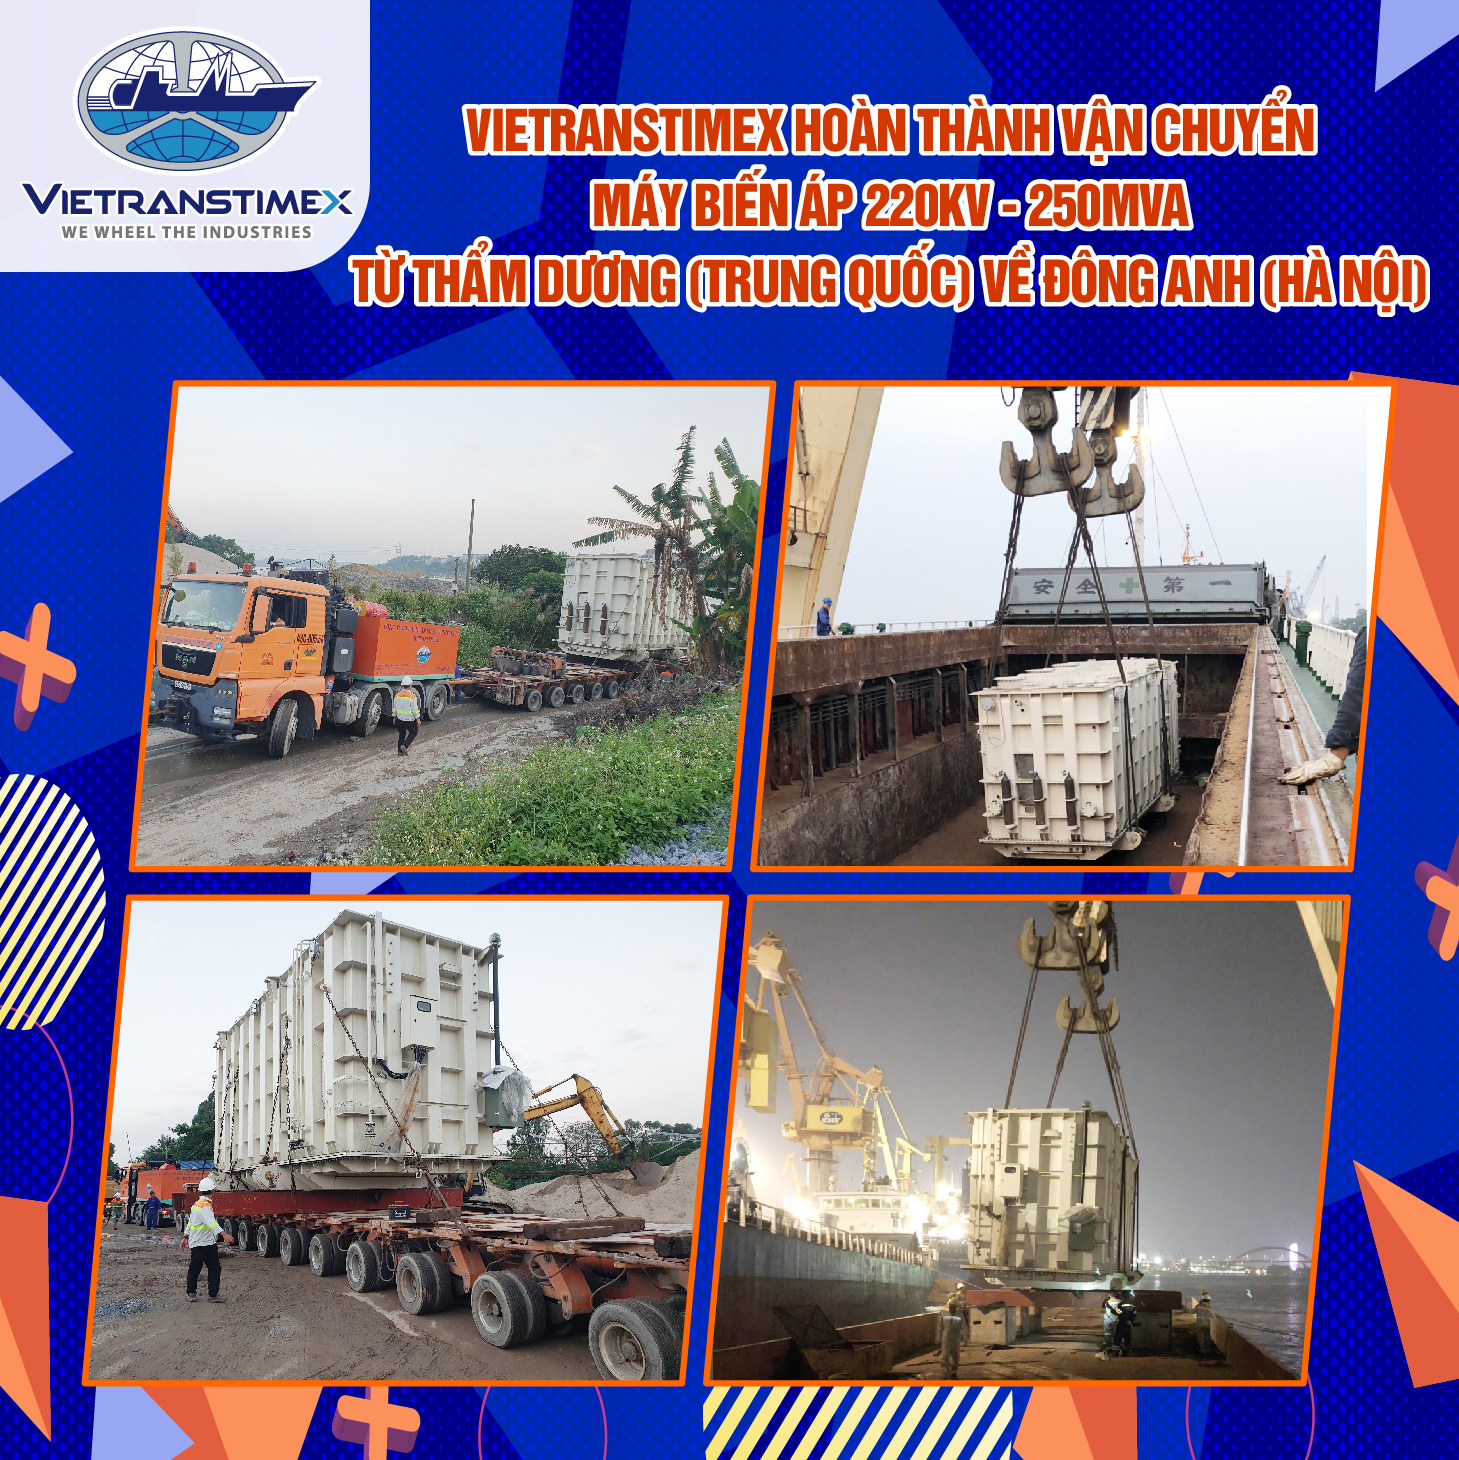 Vietranstimex Fully Completed Transportation Of 220kV - 250MVA  Transformer  From Shenyang (China) To Dong Anh (Hanoi)